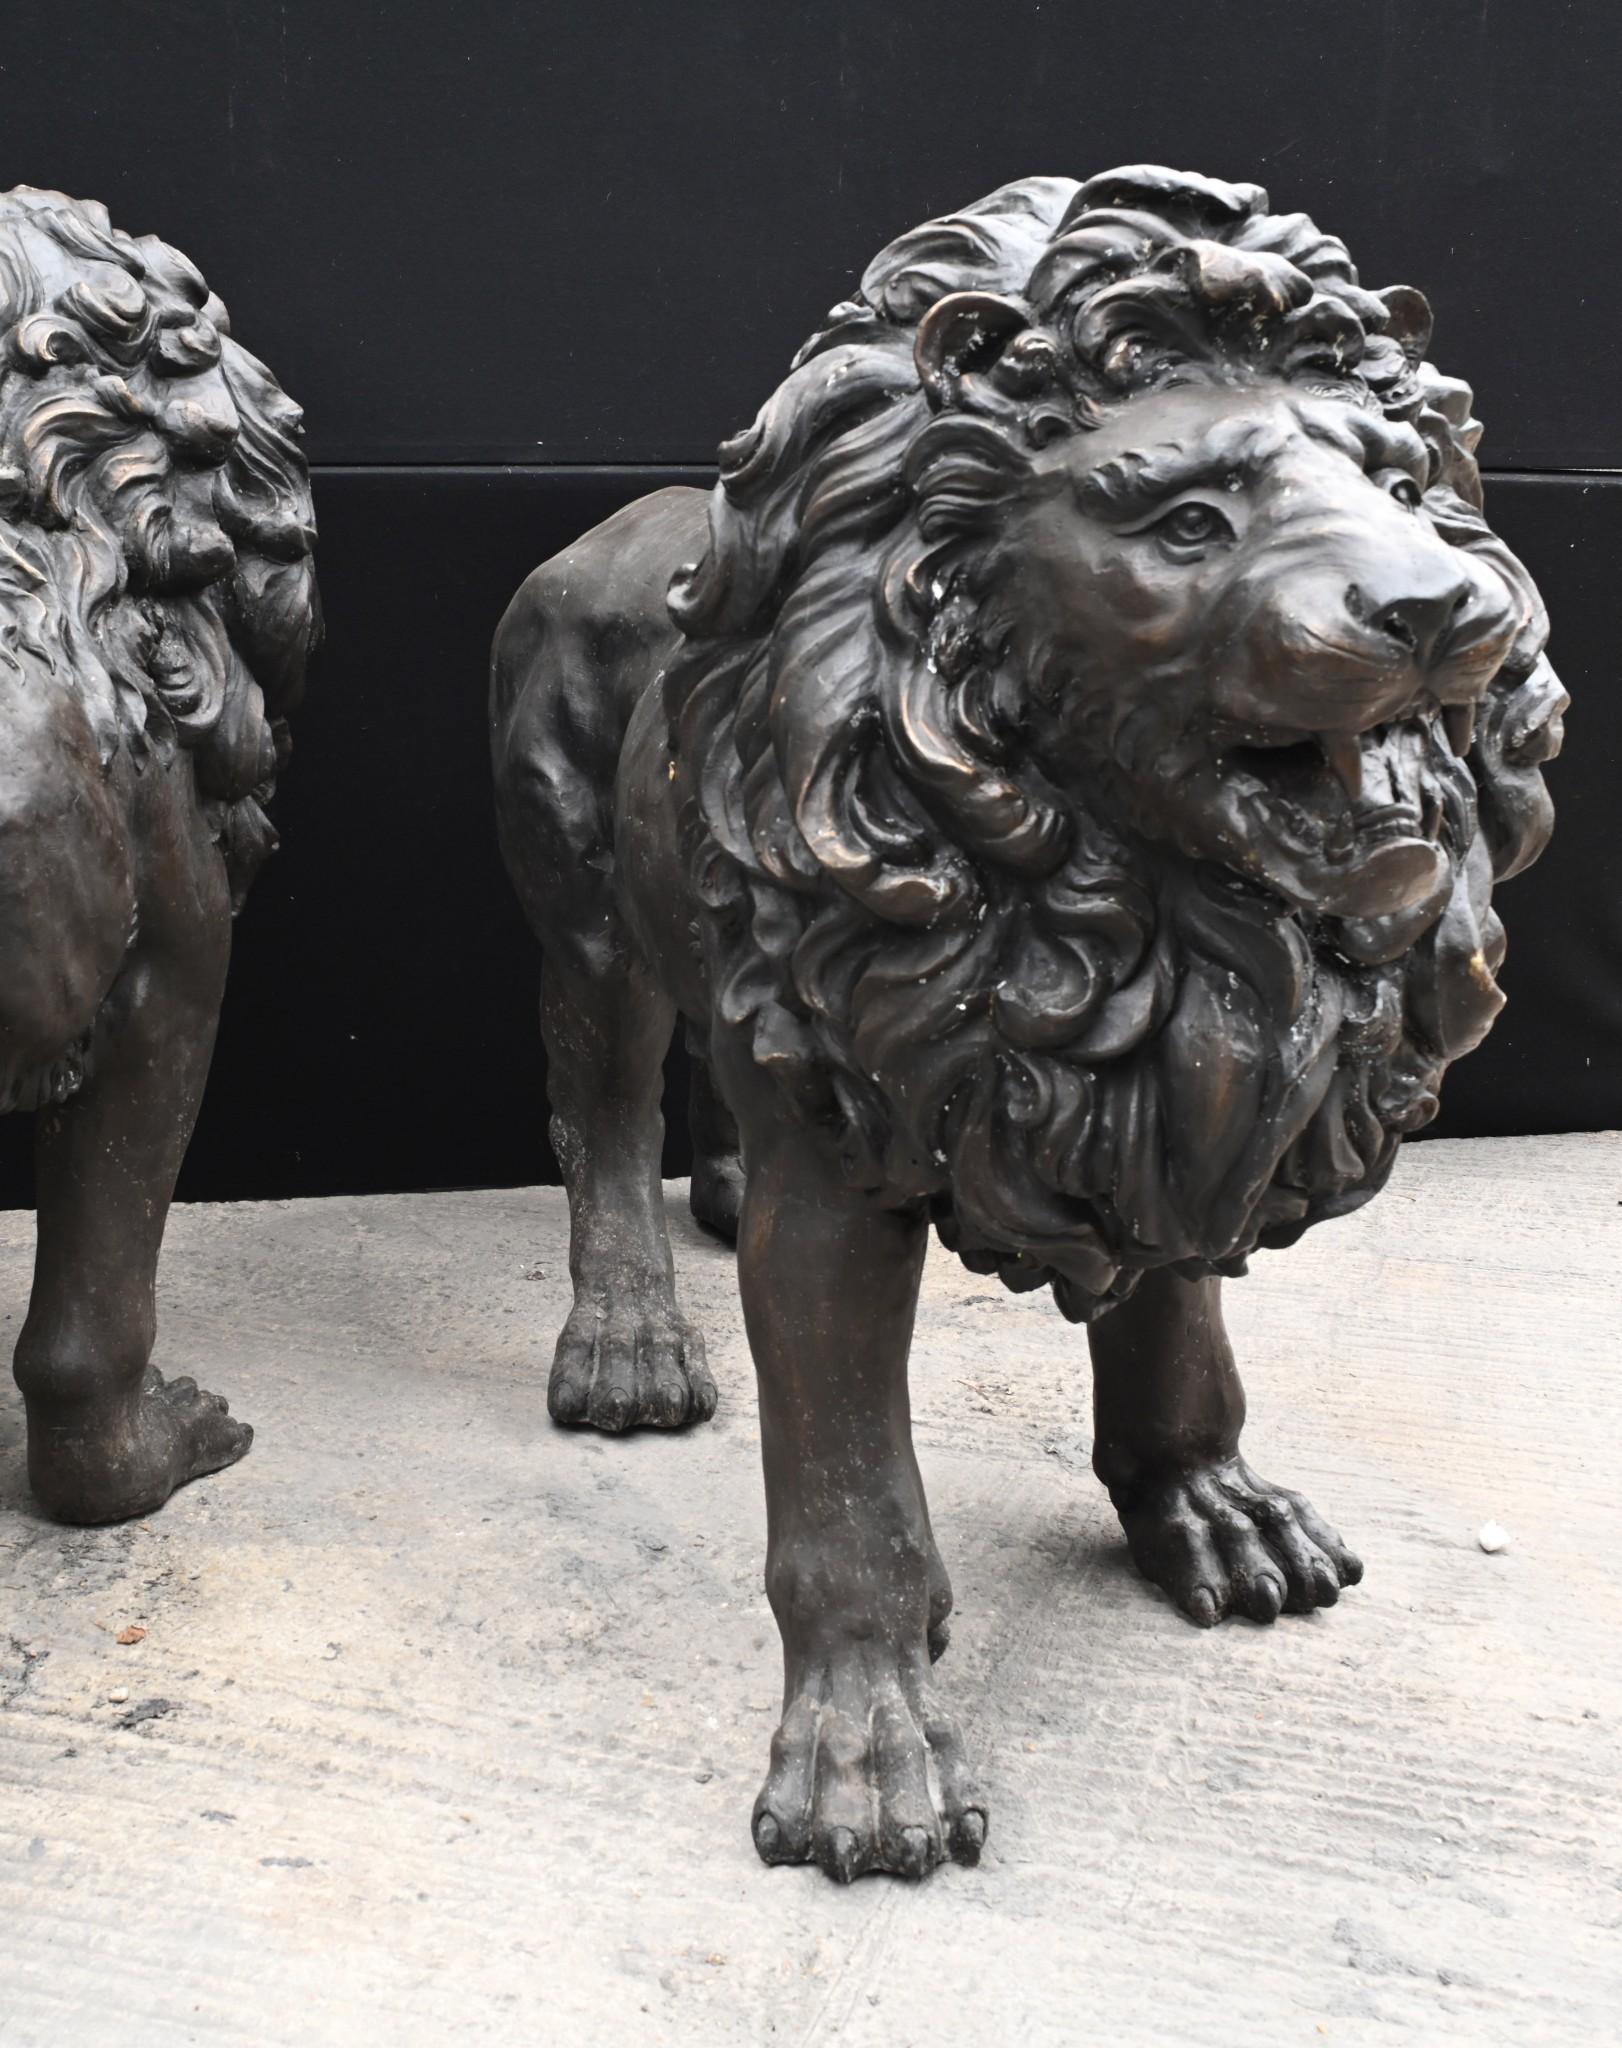 Absolutely stunning pair of giant bronze lions
Measures: 6.5 feet - 198cm - head to toe so monumental
Amazing patina and the artist really has captured the beauty to the beasts with the rending of their muscletone and manes
These would work as a